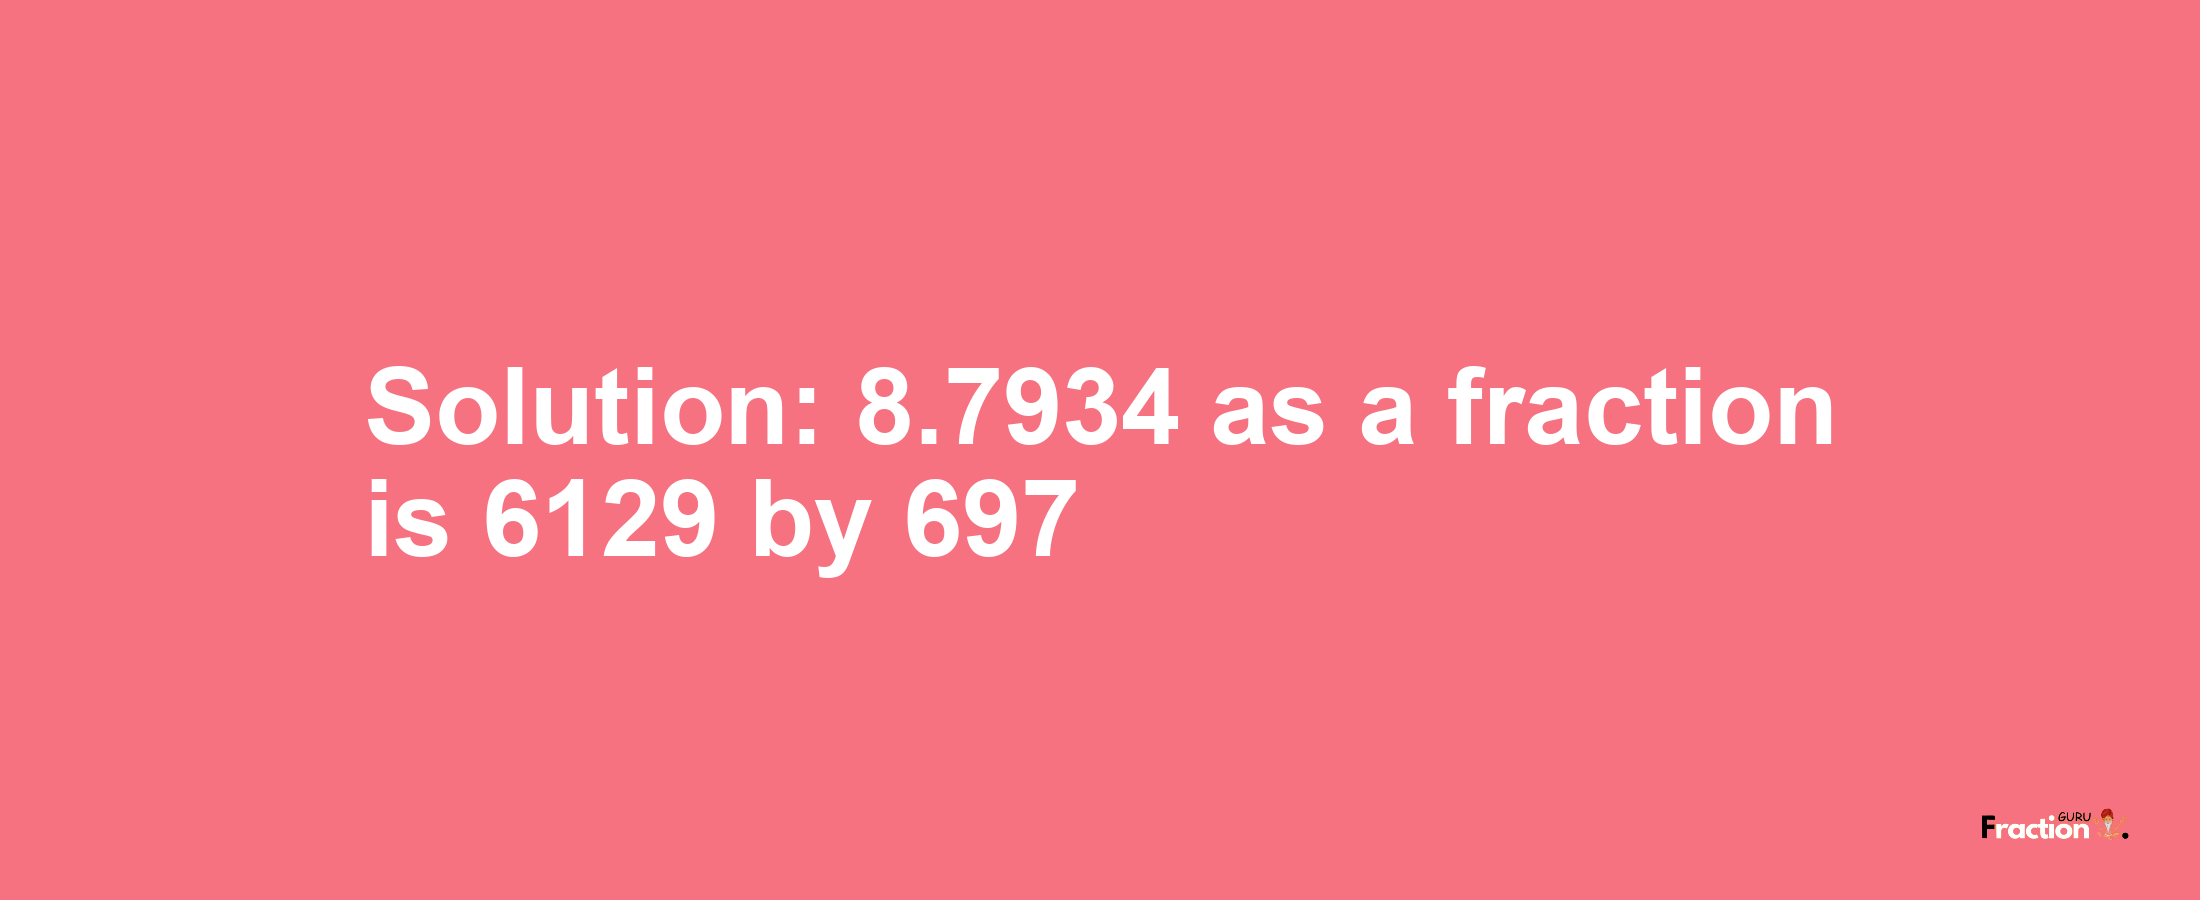 Solution:8.7934 as a fraction is 6129/697